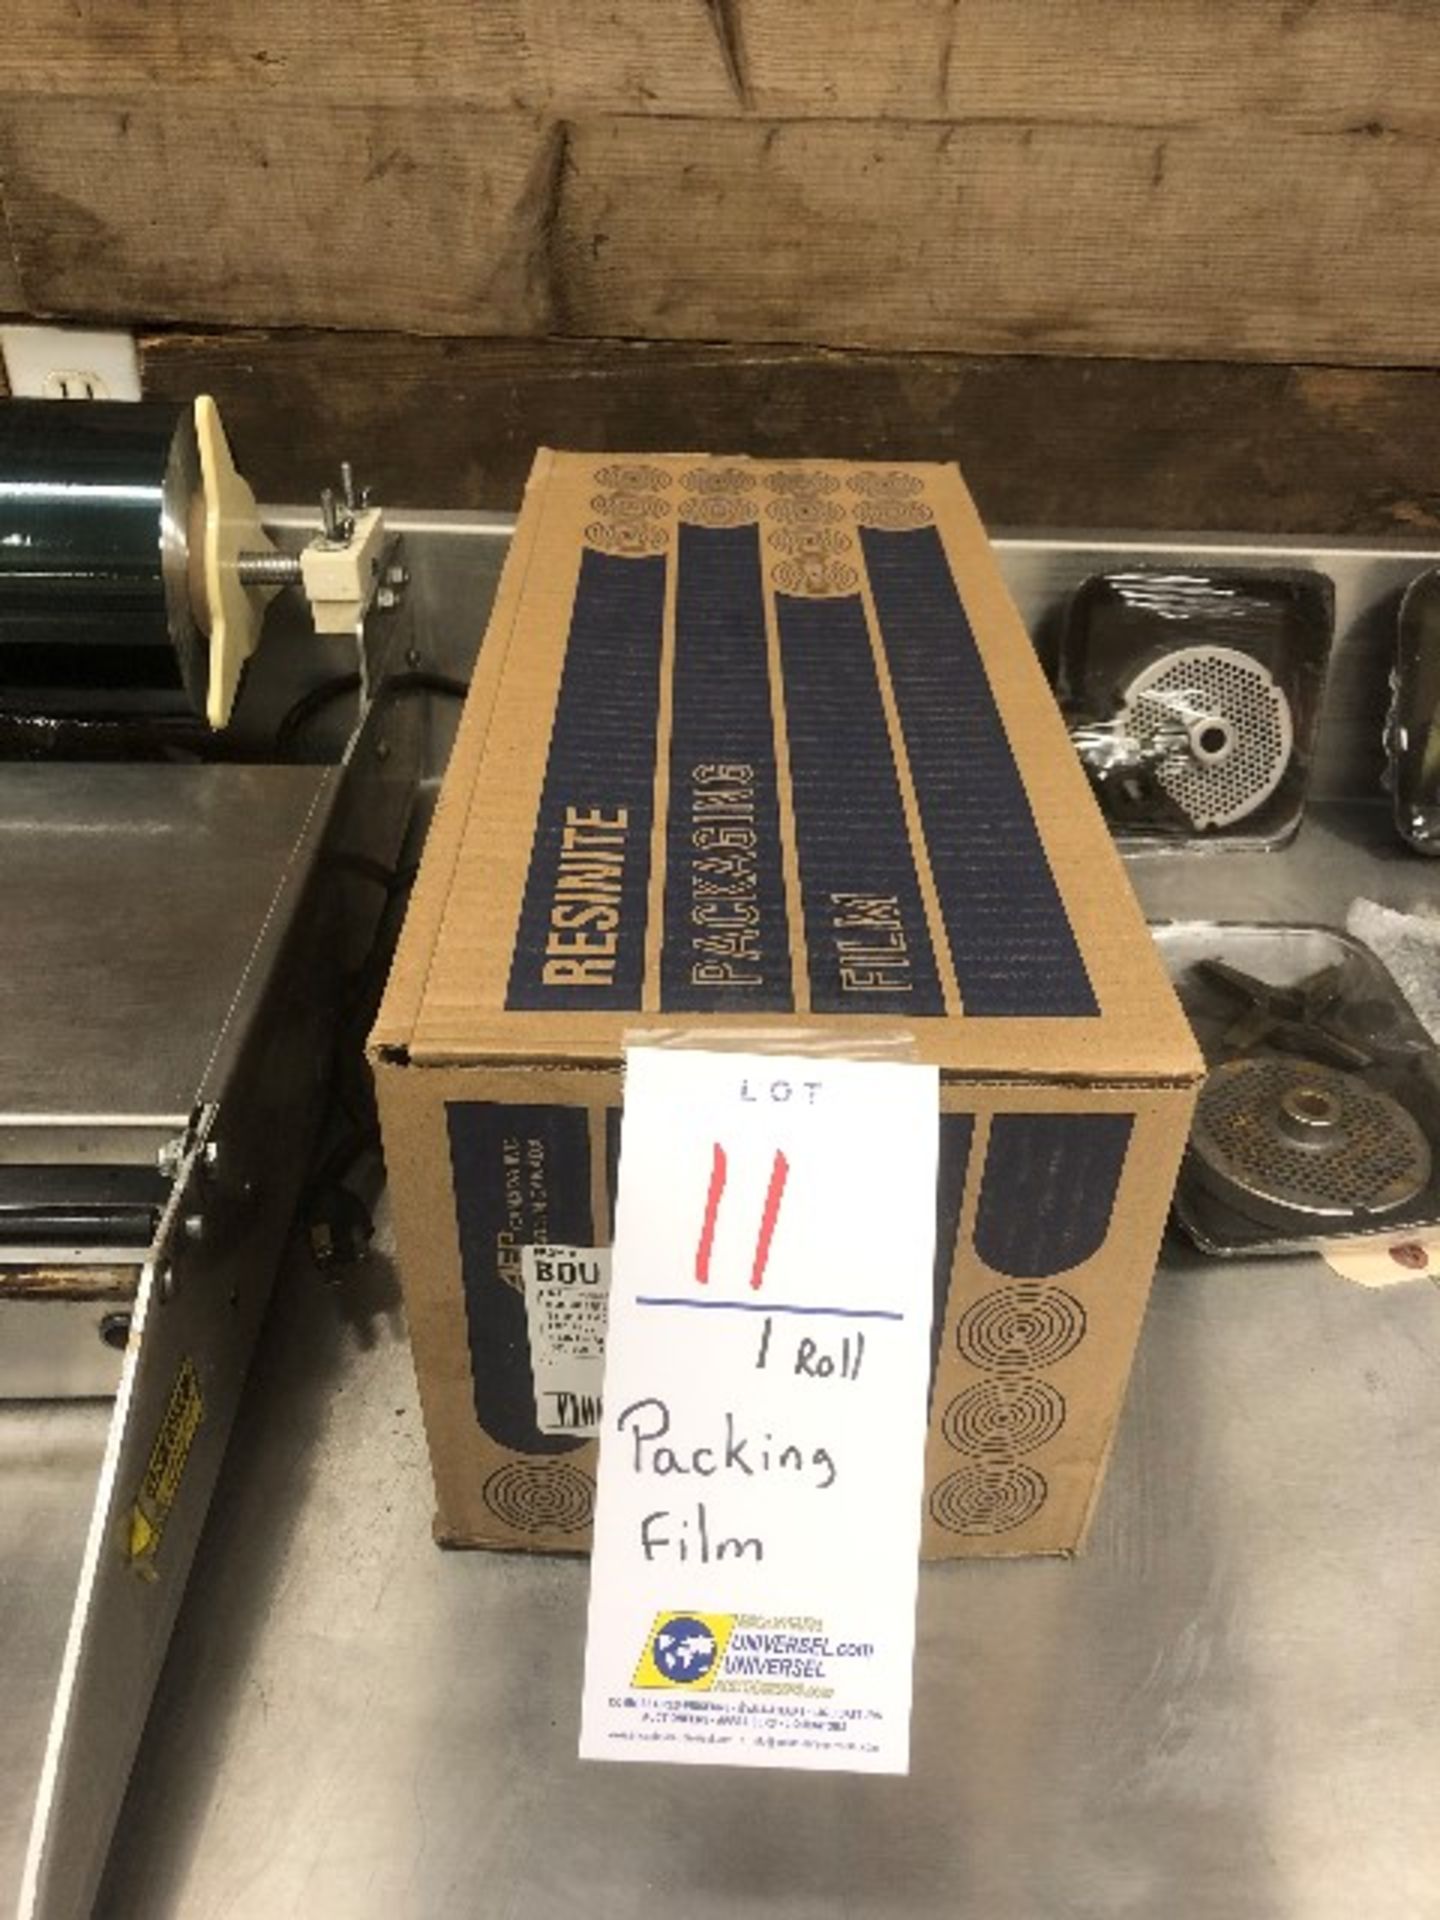 Packing film roll